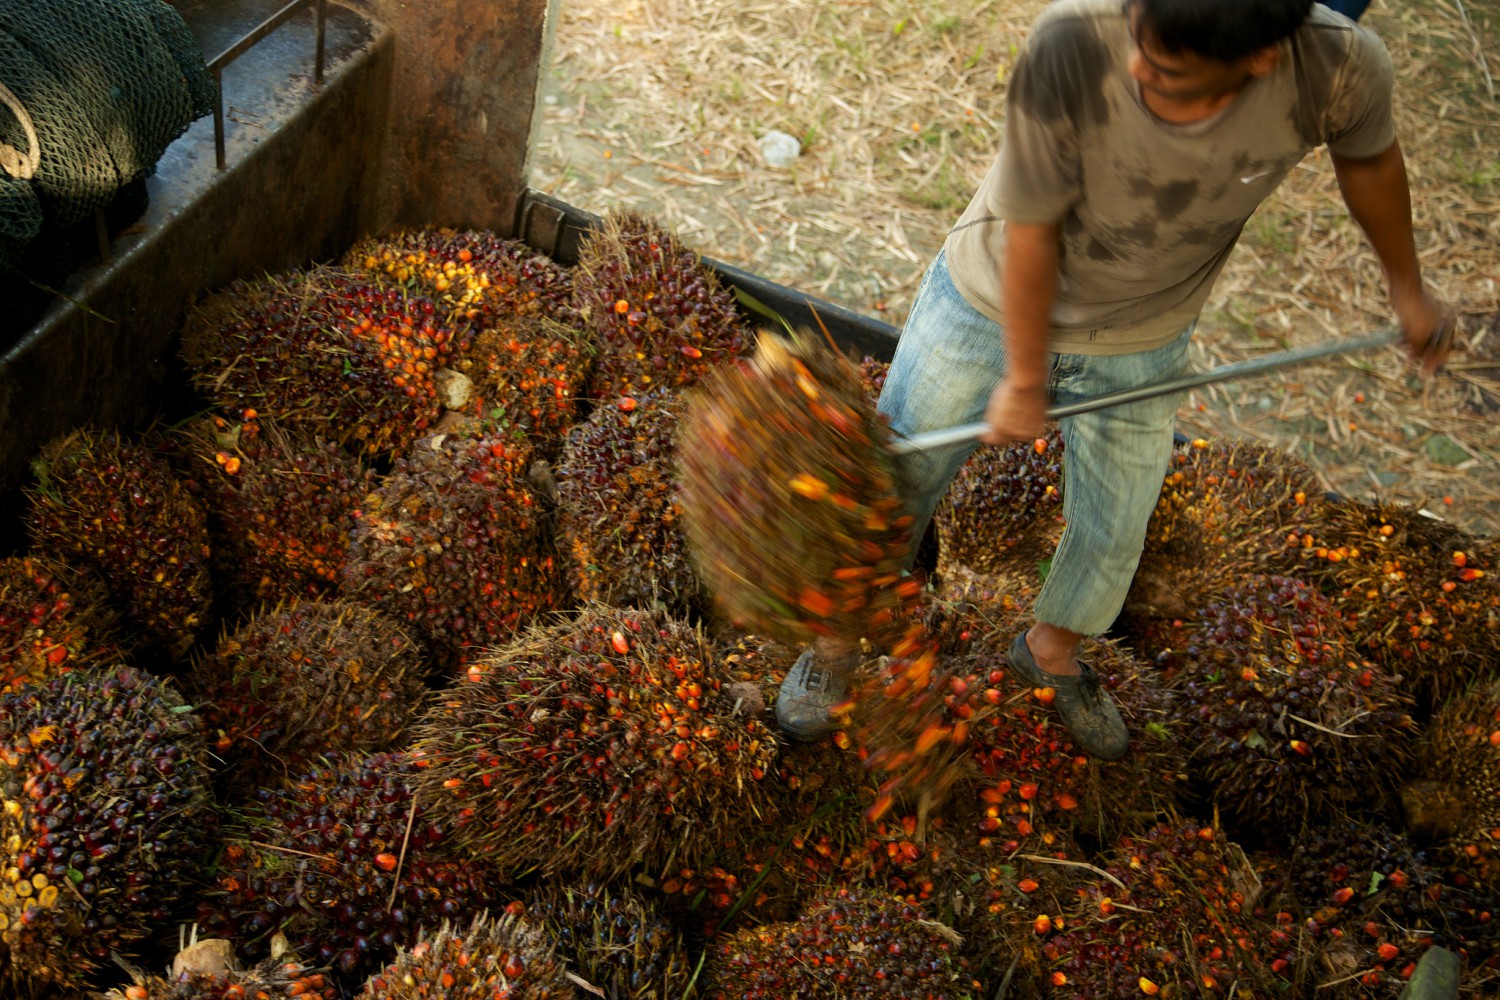 A worker loading oil palm fruit off a truck in Sabah, Malaysia.